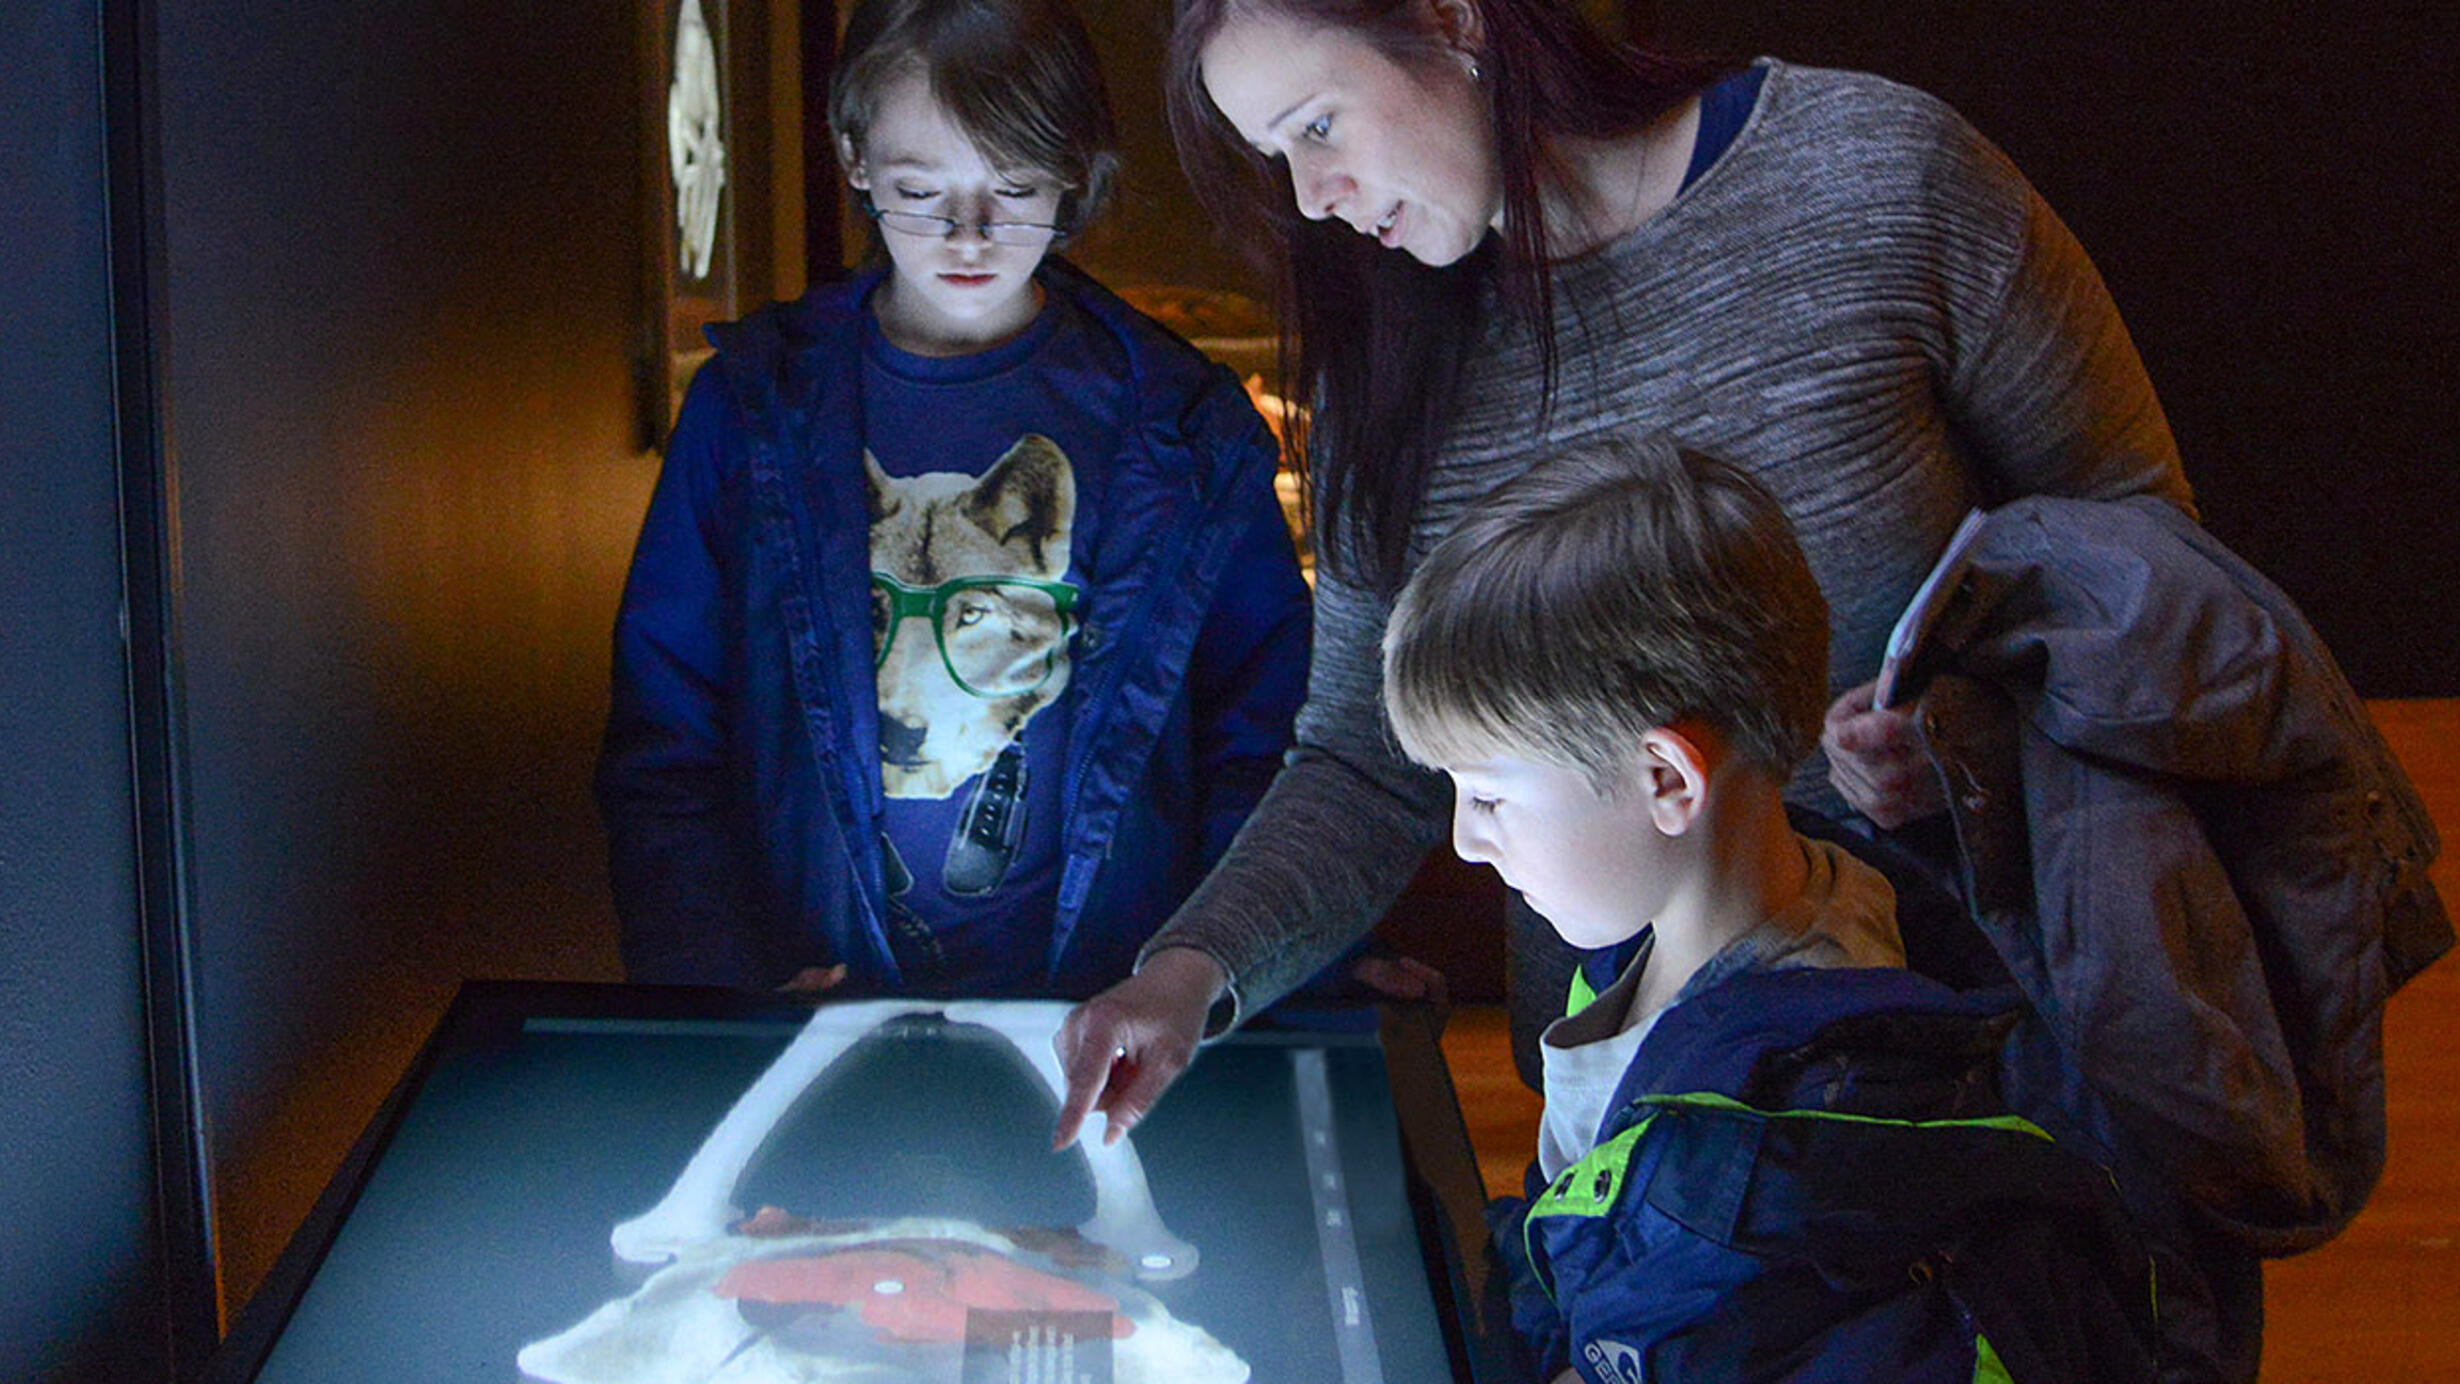 Two children and an adult gather around a tabletop digital touch screen that allows them to see "inside" the mummy via CT scans.